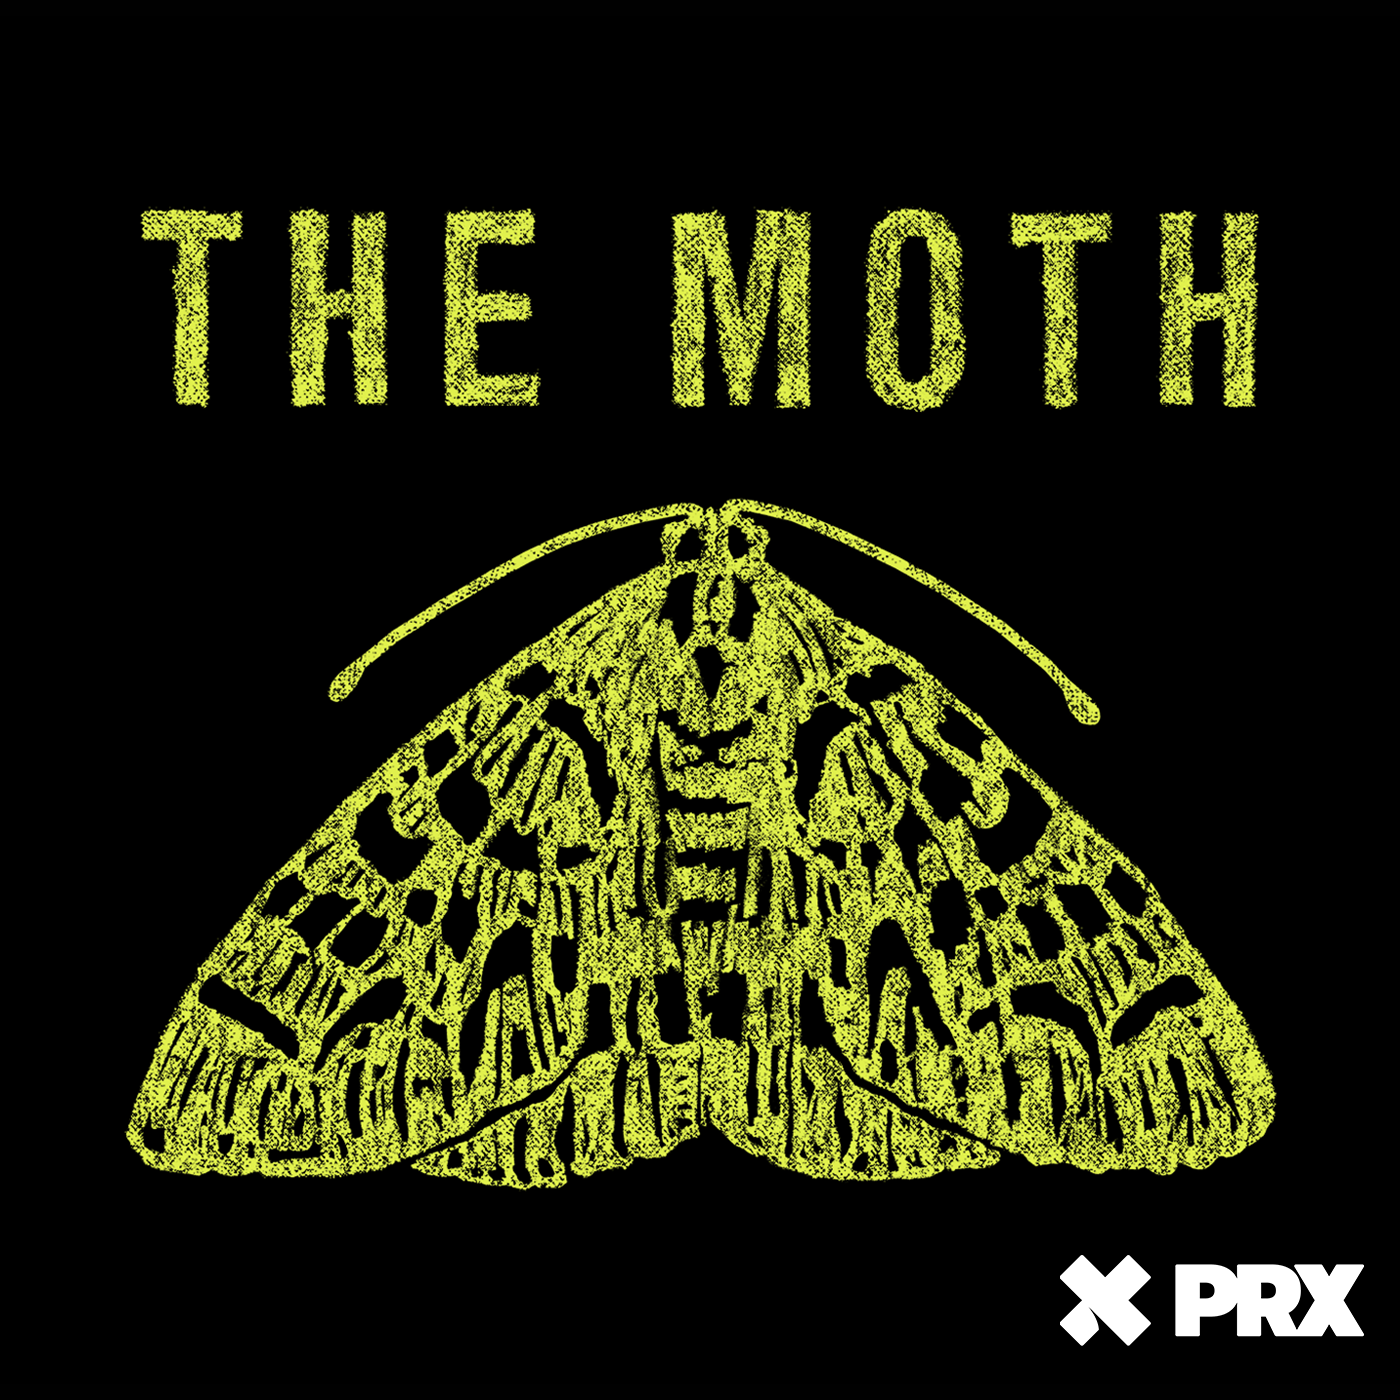 The Moth Radio Hour: The Push and the Pull